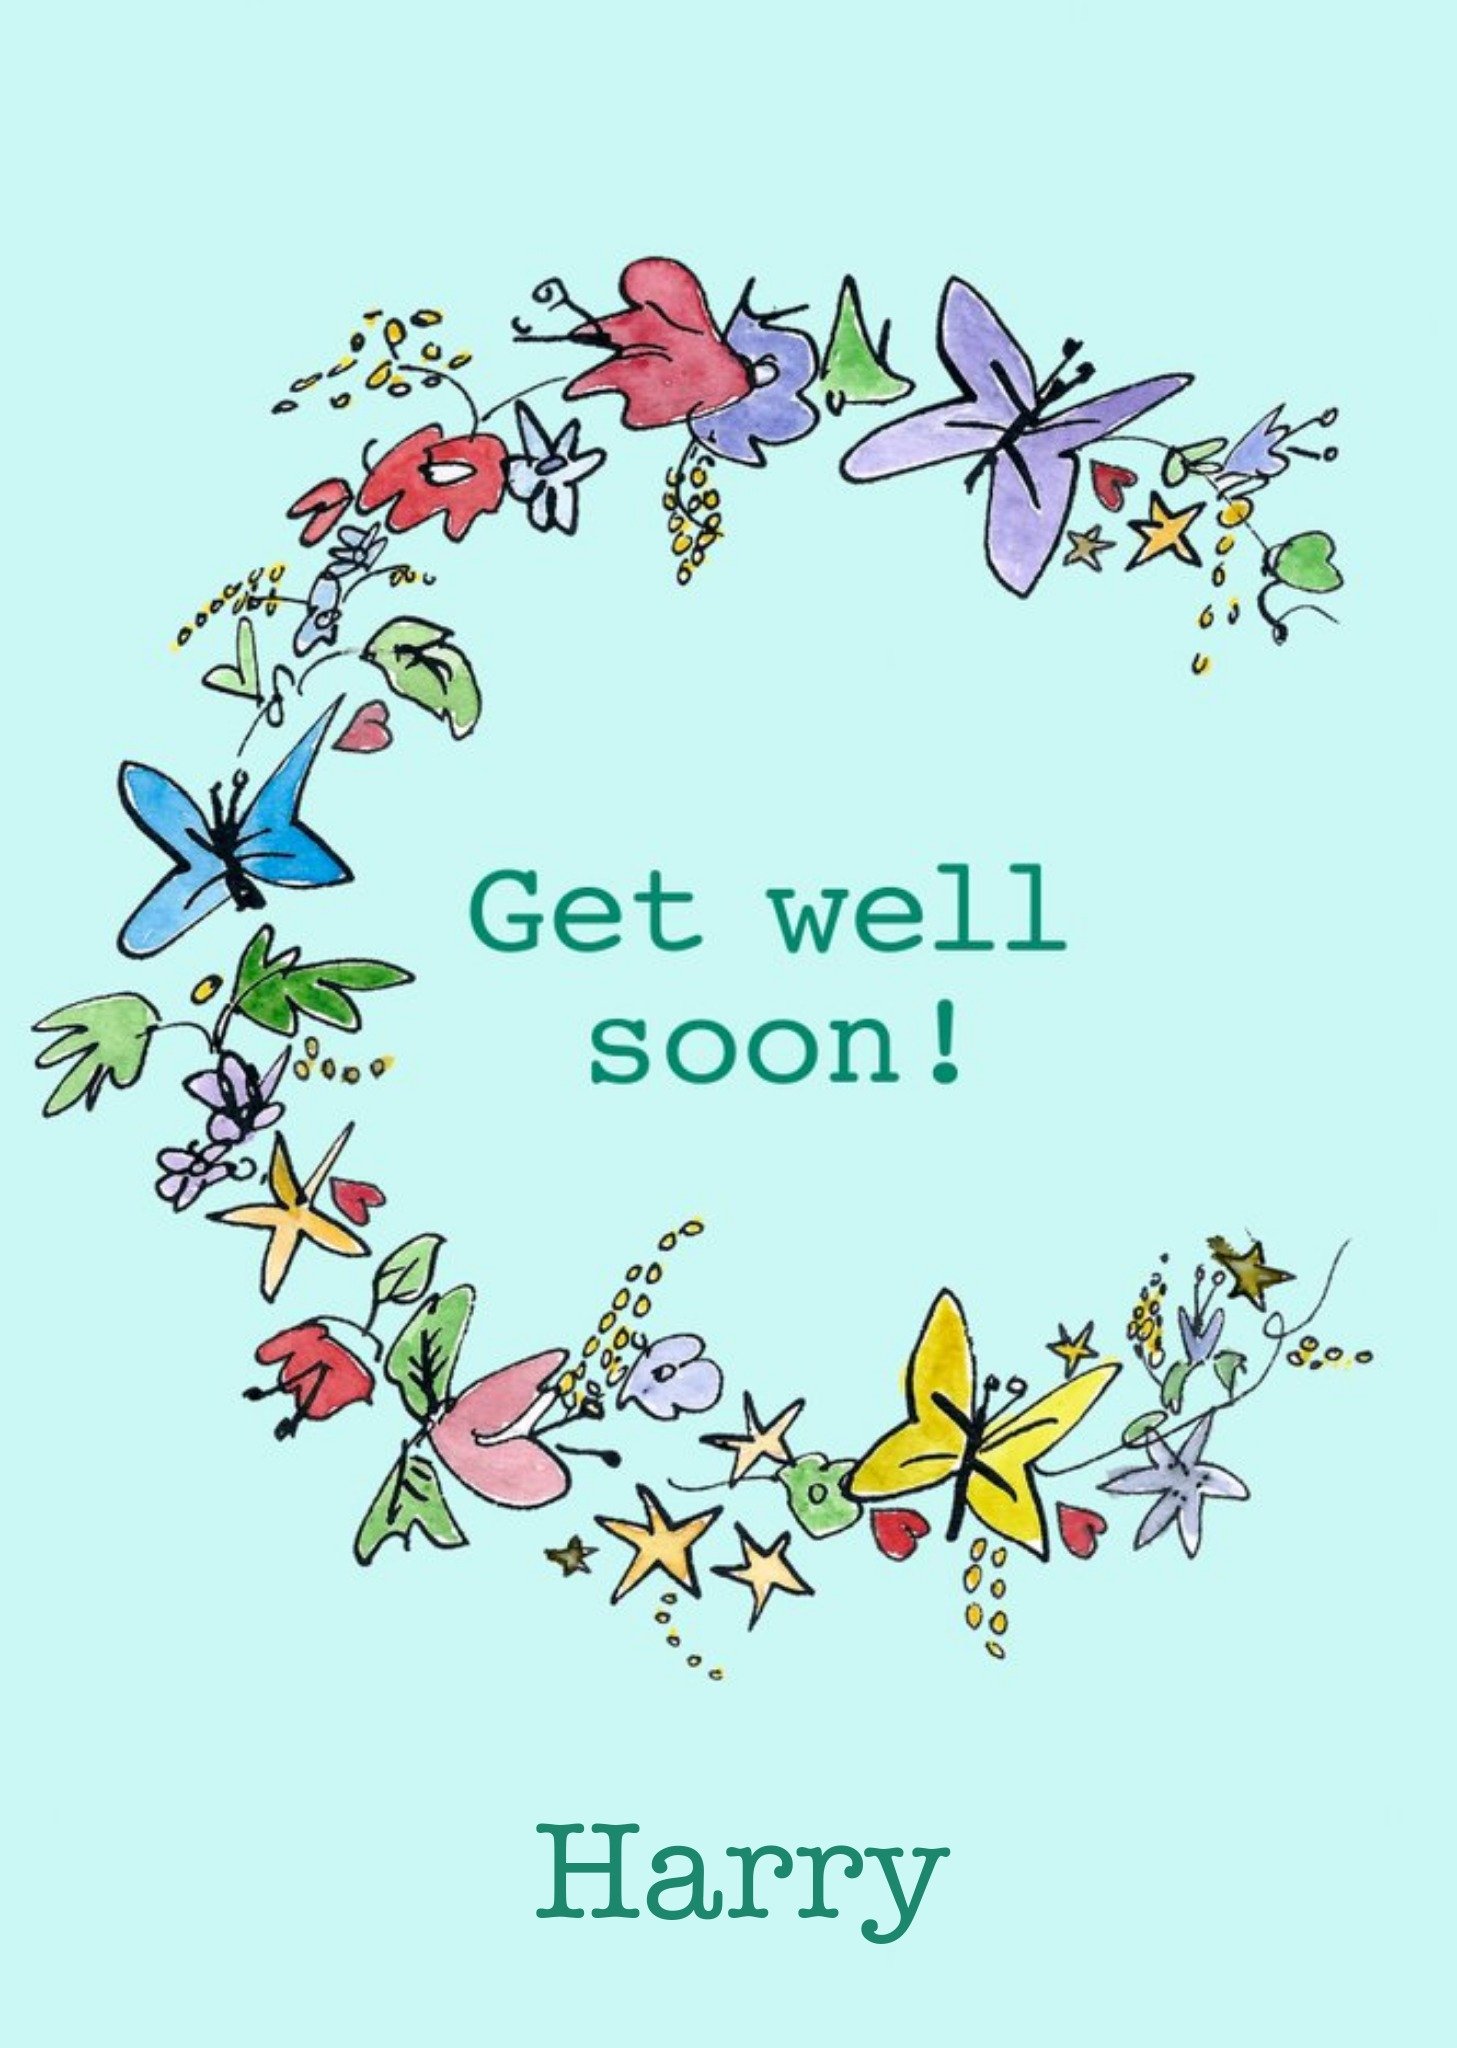 Moonpig Illustration Of Flowers And Butterflies Surrounding Text Get Well Soon Card, Large